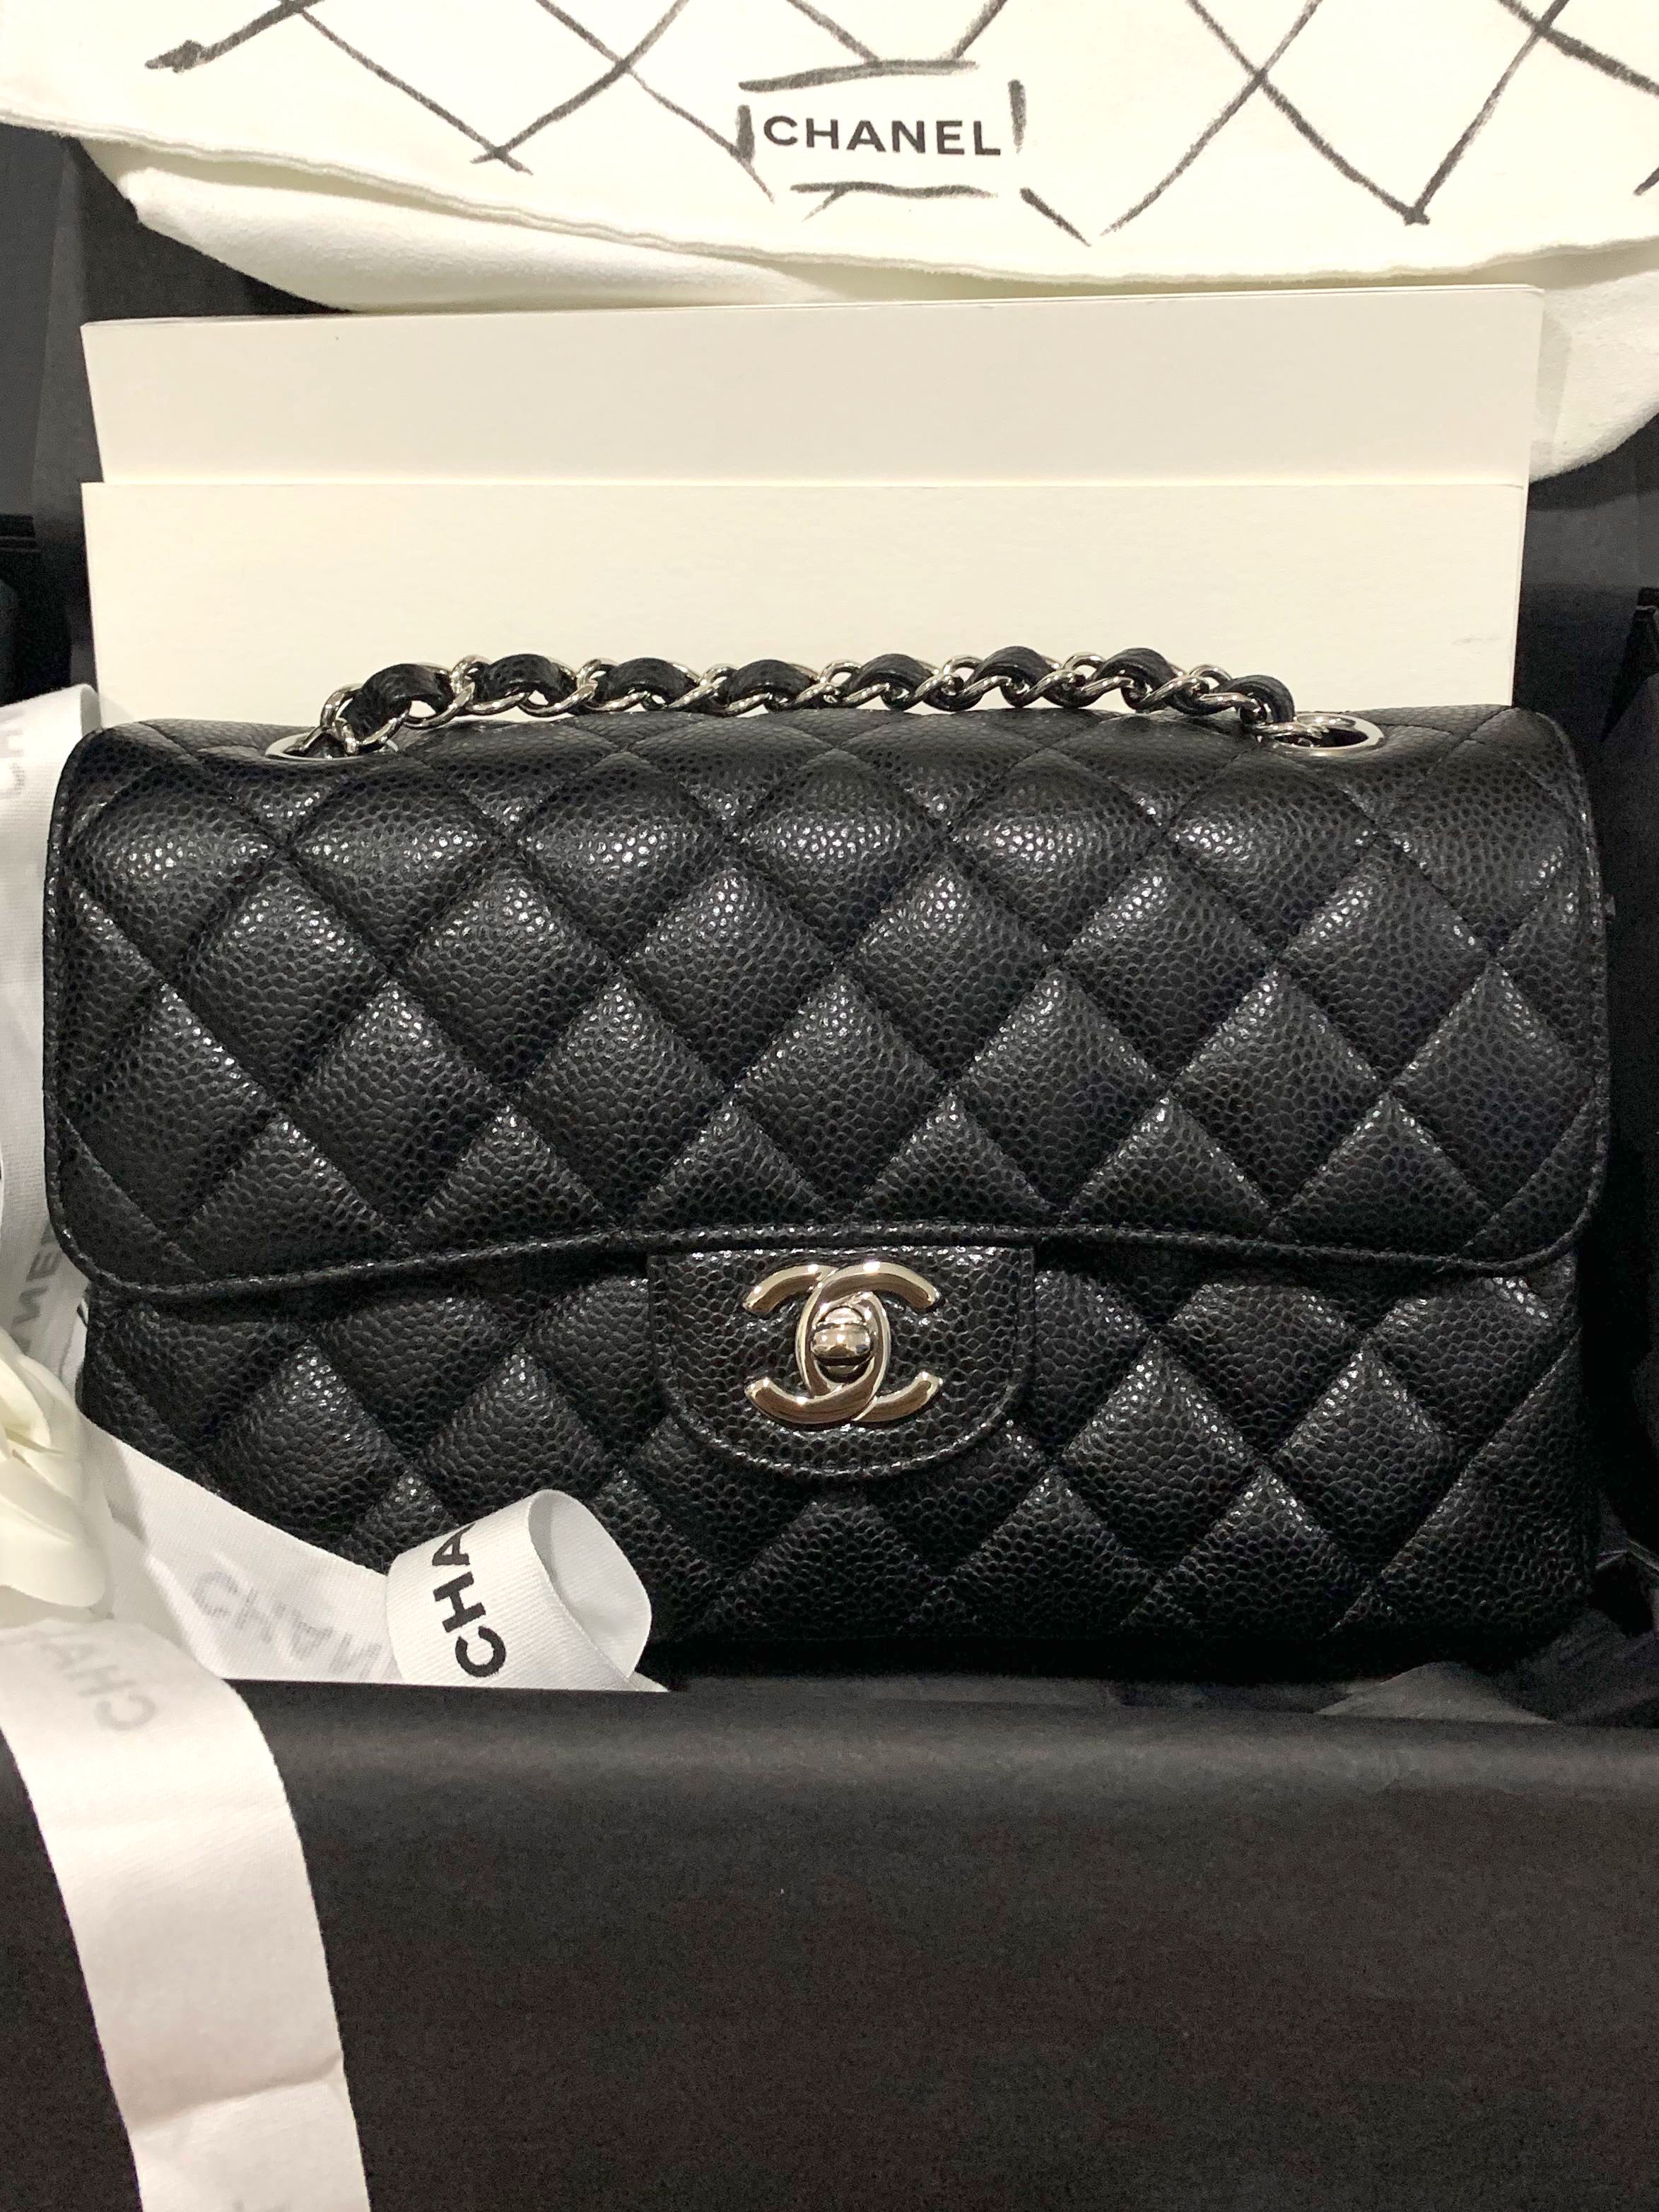 Chanel Classic Mini Flap Bag in Navy Caviar with Silver Hardware  SOLD